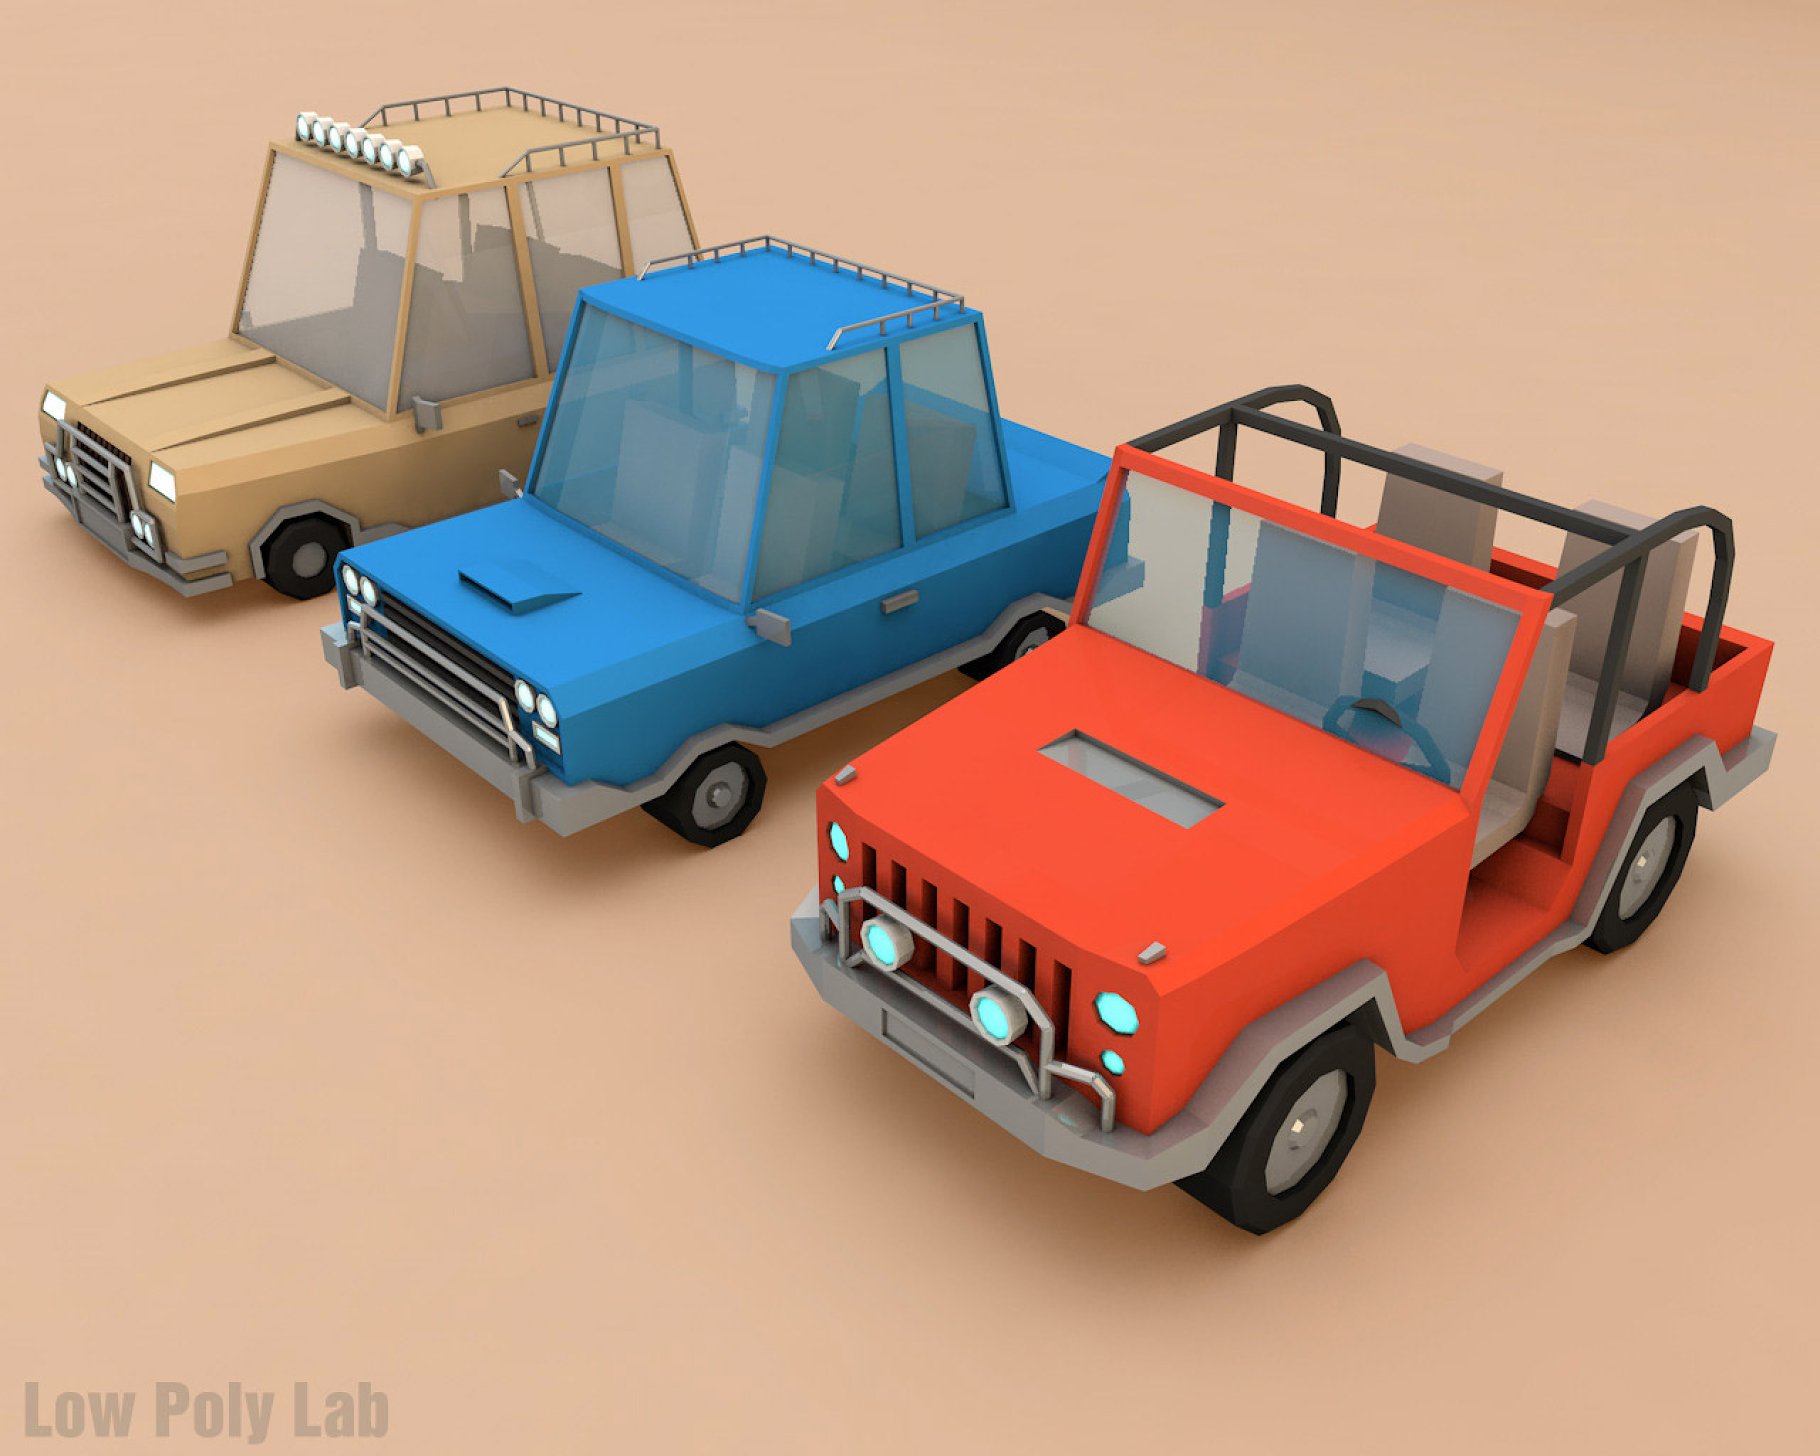 Beige, blue and orange low poly cars jeep family car mockups on a beige background.